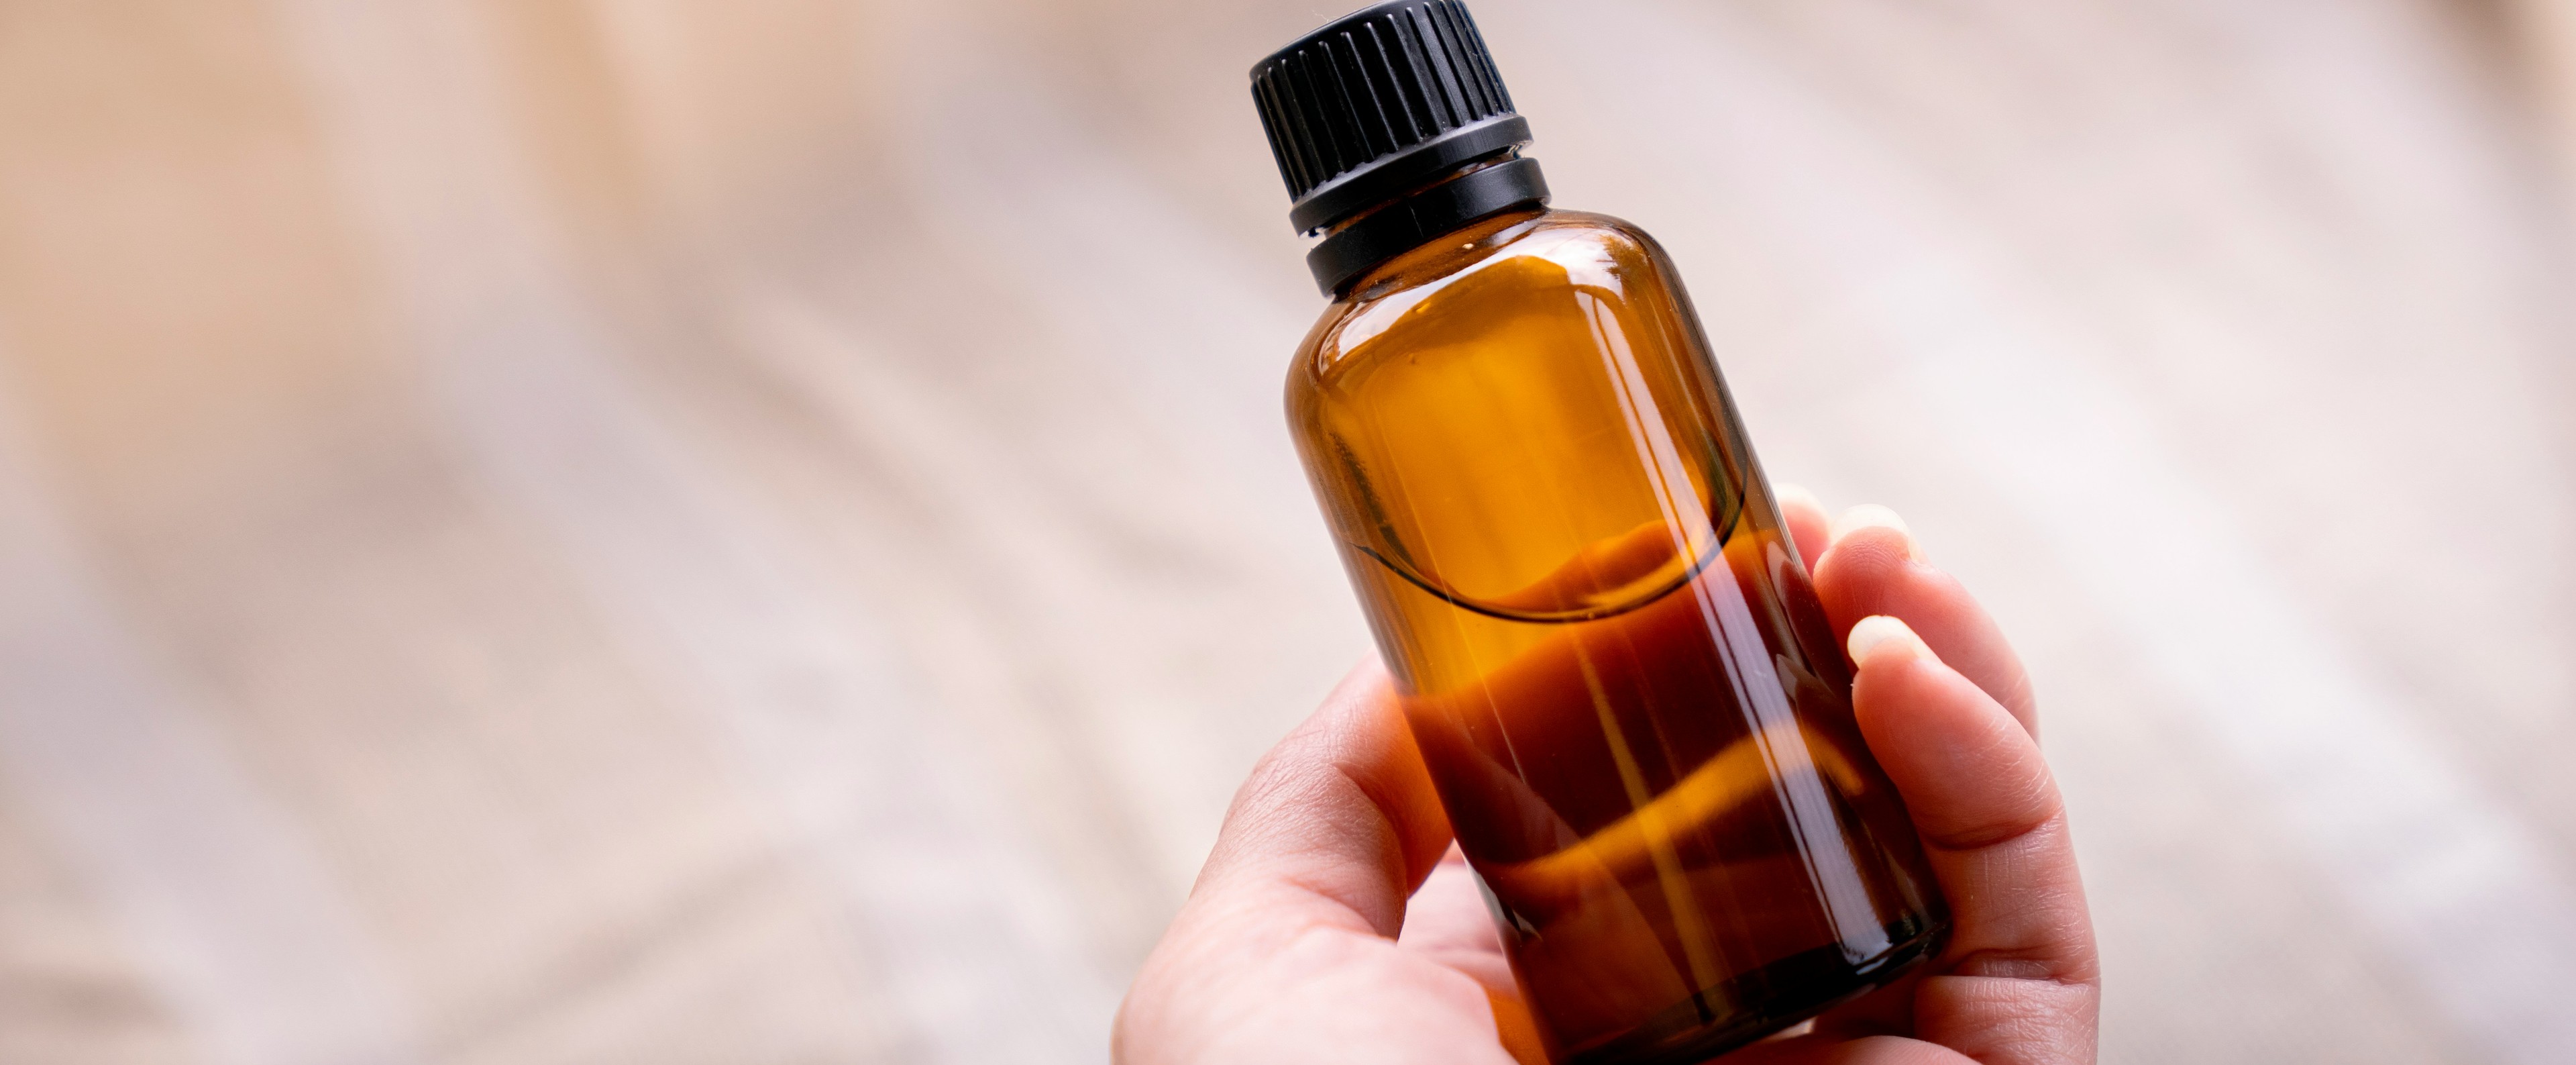 Types of Musk Oils